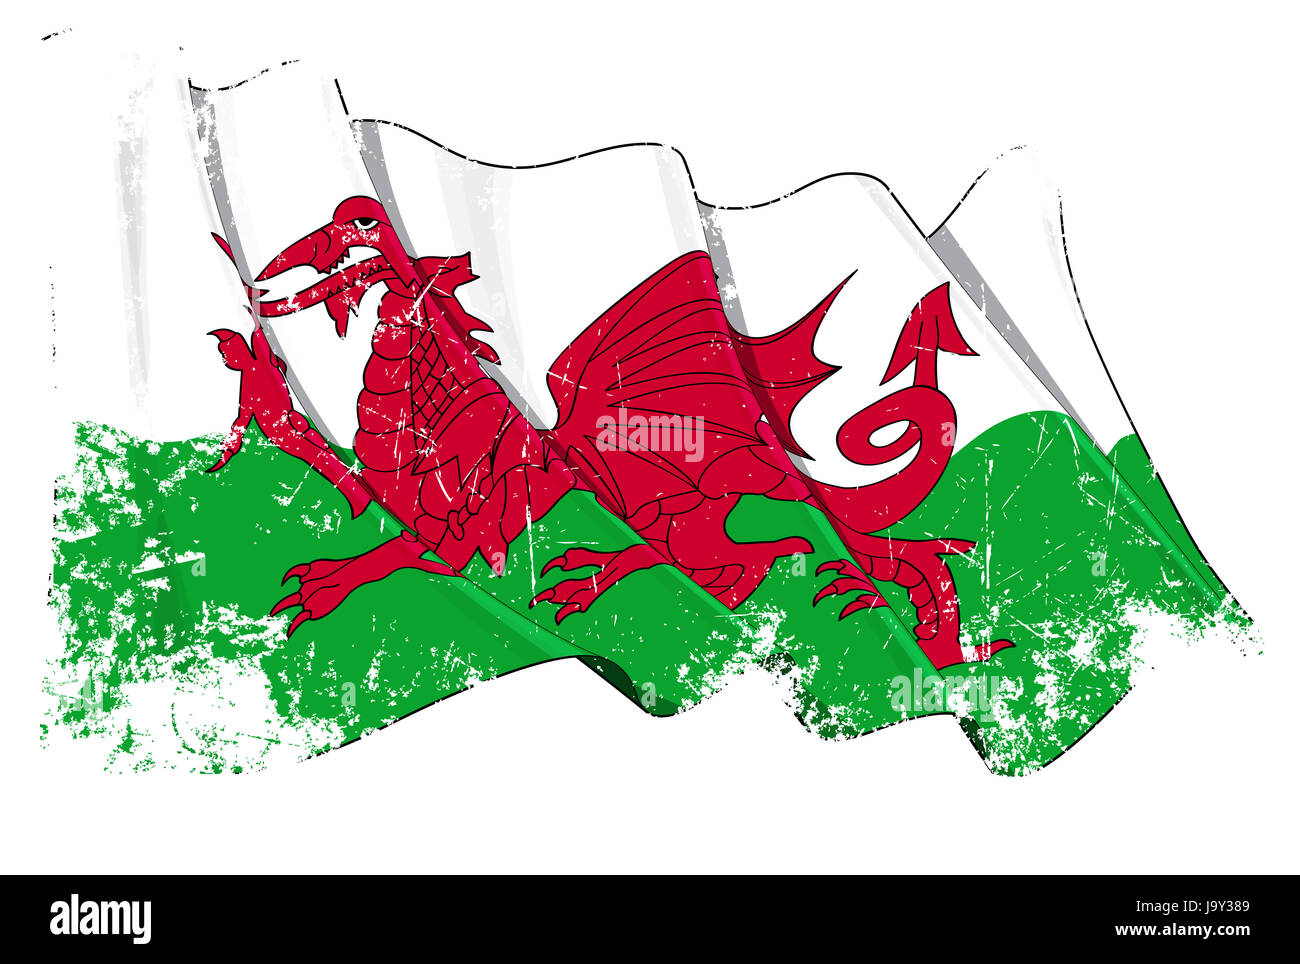 illustration, flag, dragon, wales, welsh, commonwealth, green, europe, Stock Photo